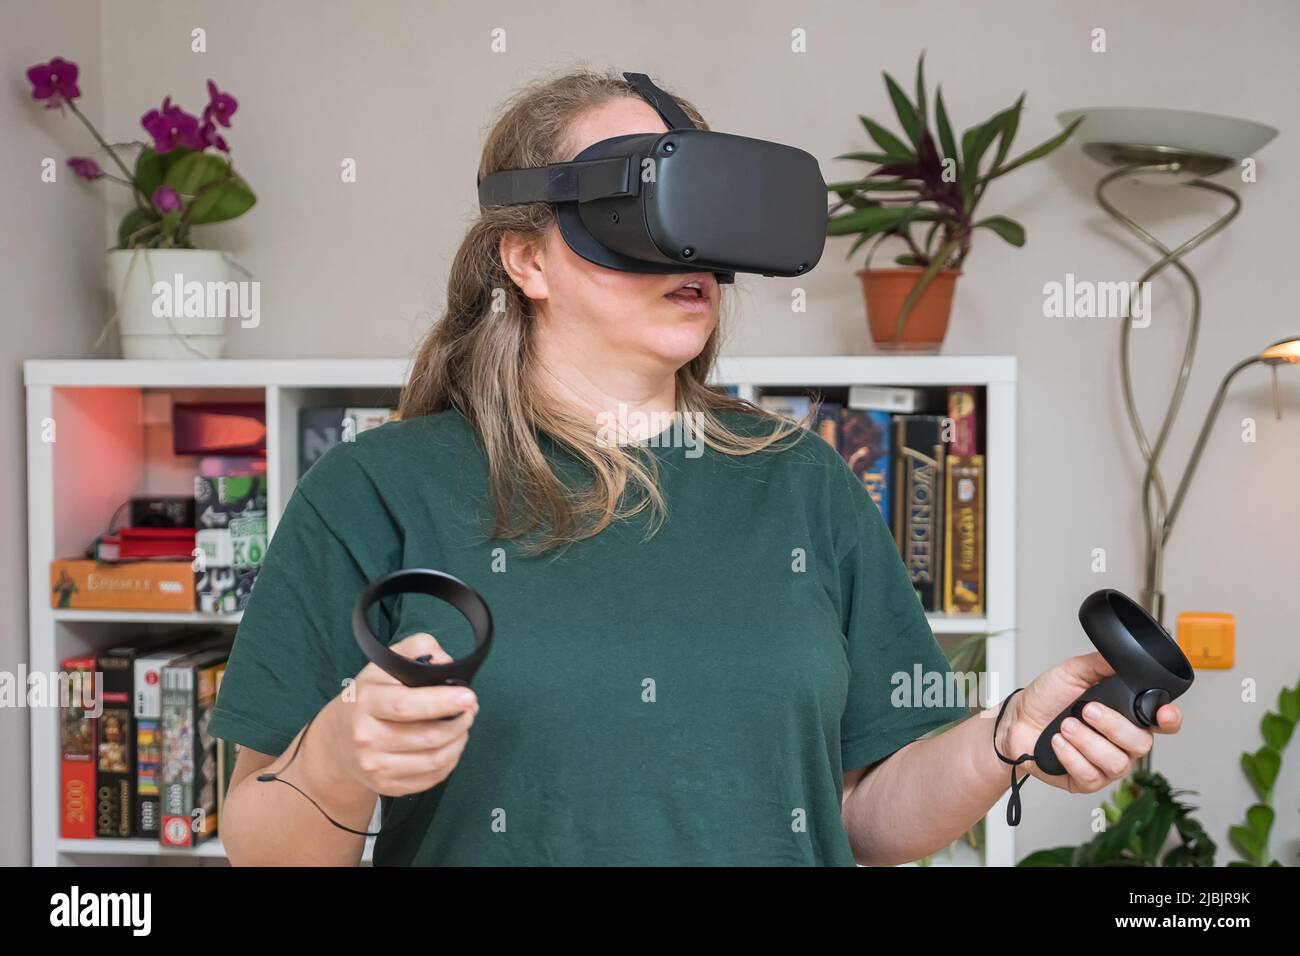 A girl in a VR helmet wearing a green T-shirt and controllers in her hands travels through metacenter. In background are shelves with board games, flo Stock Photo